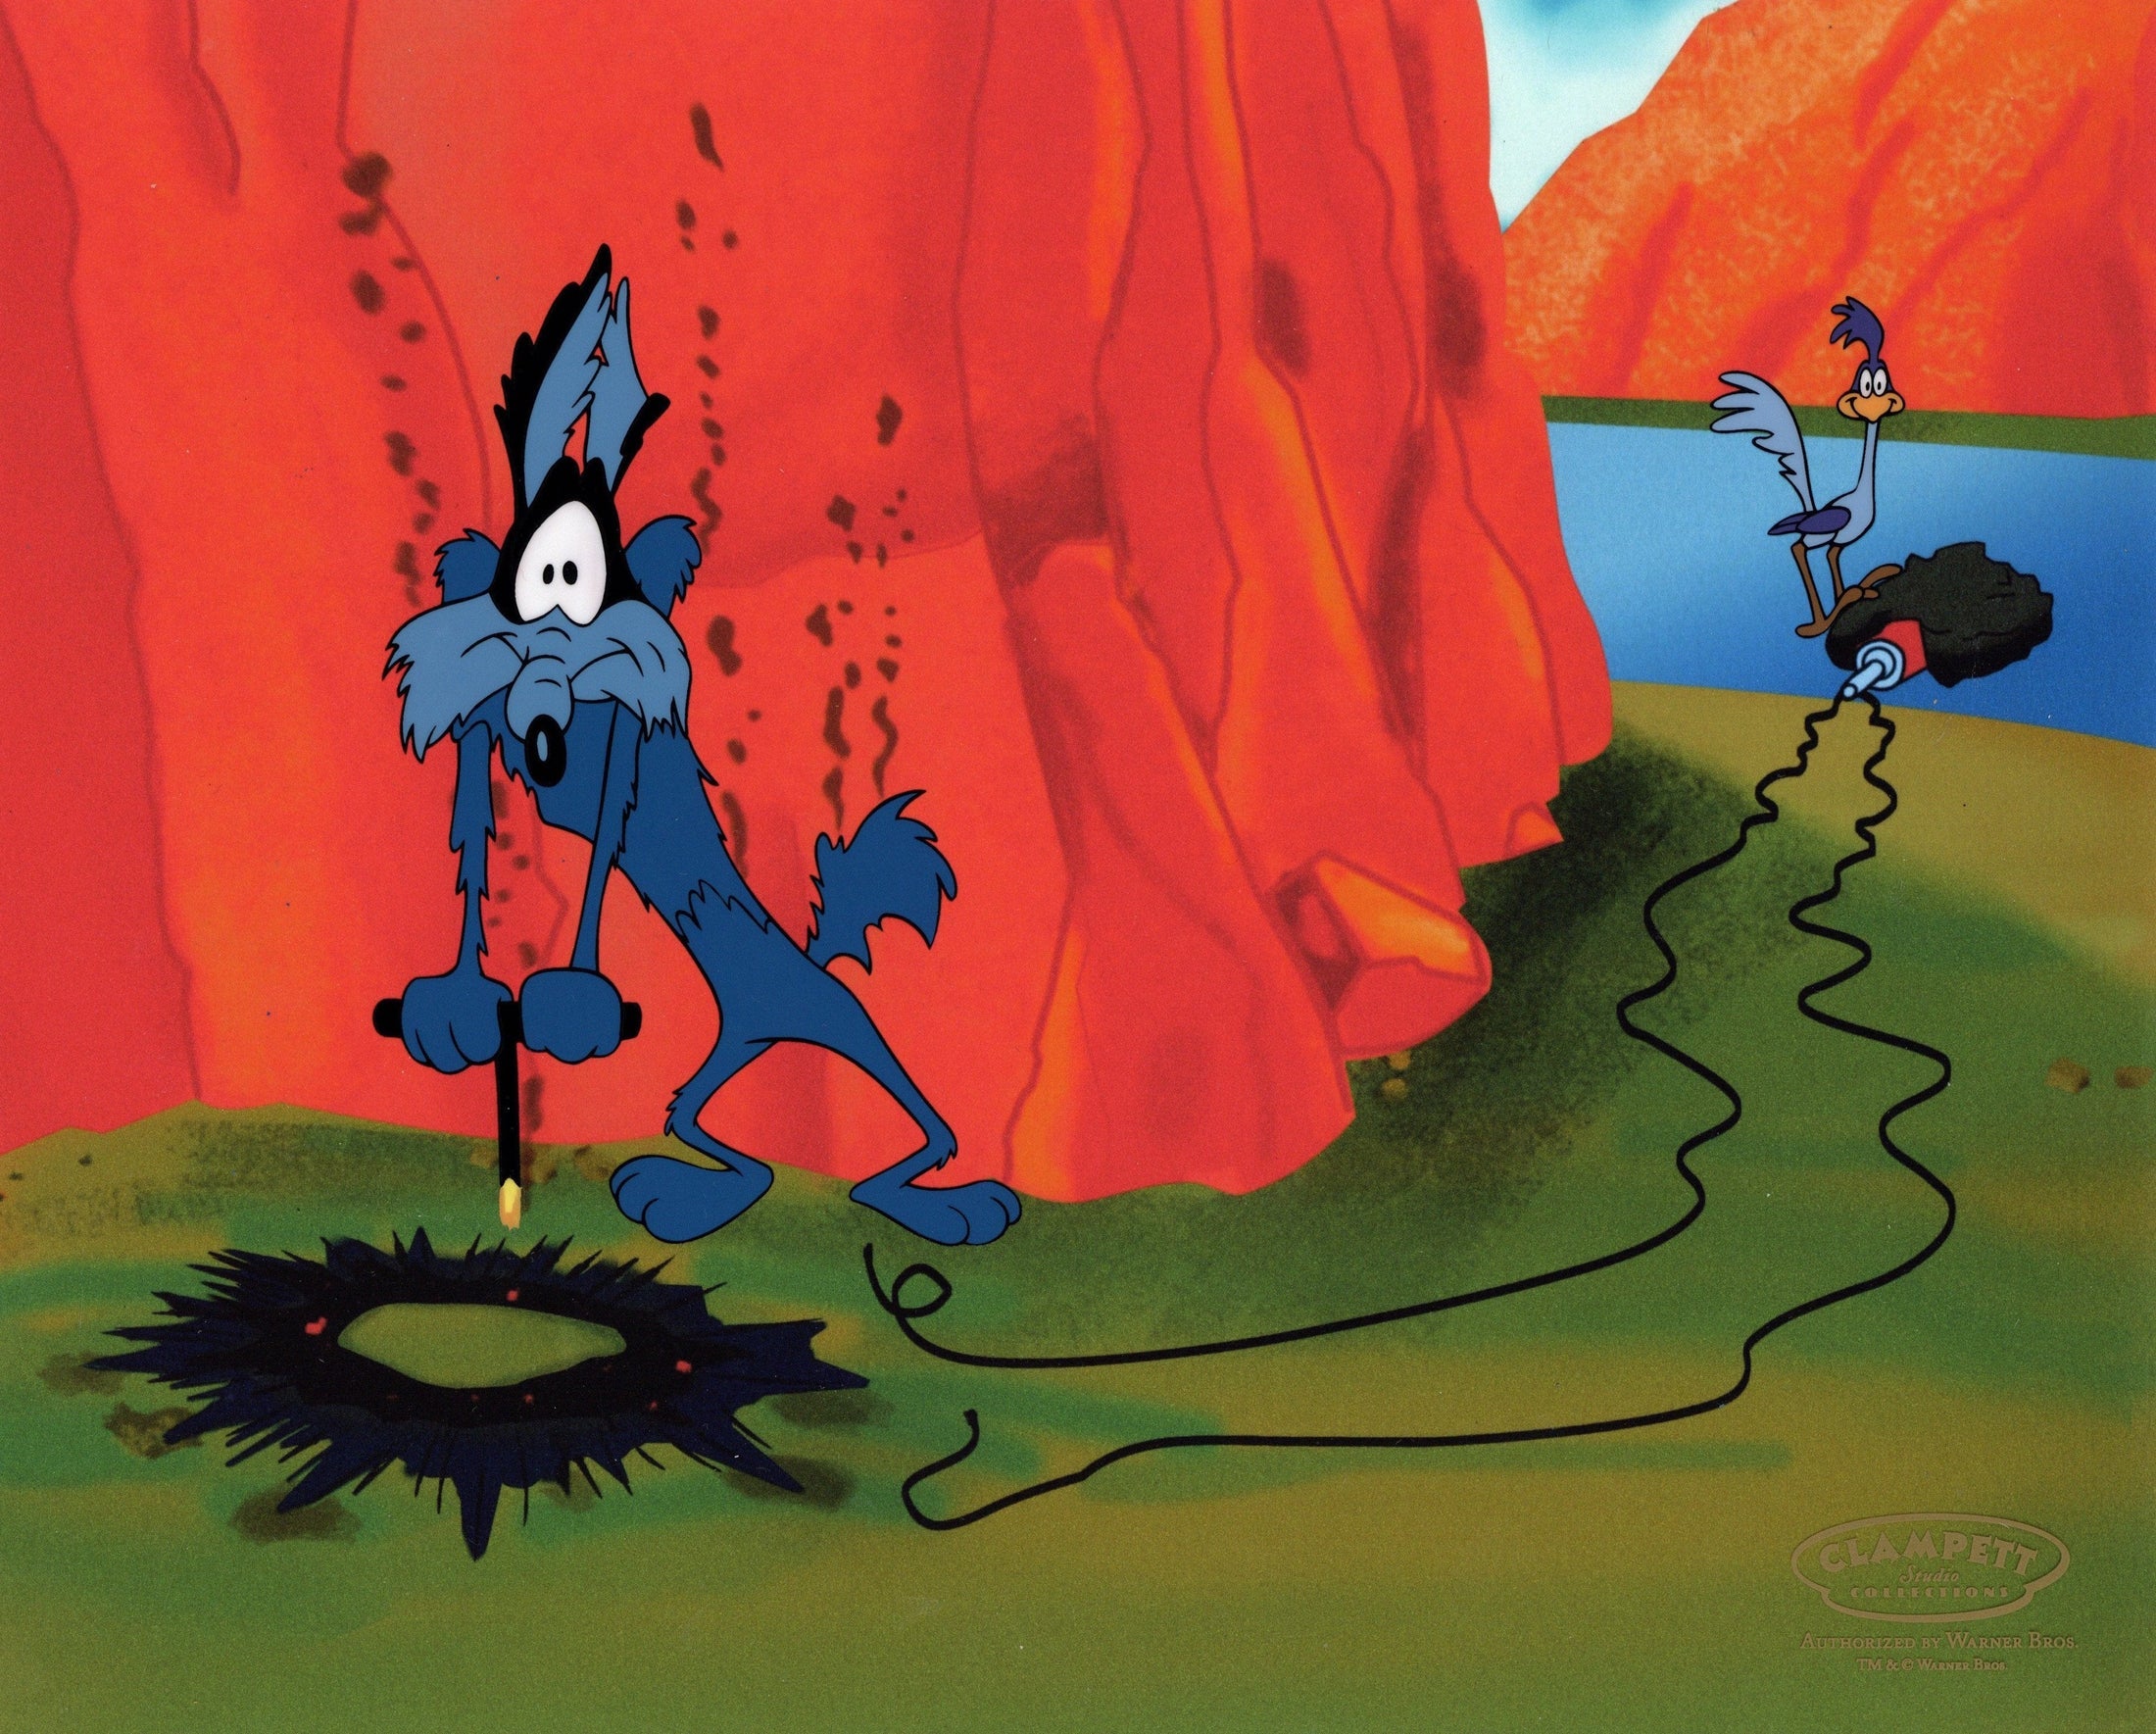 Wile E. Coyote endures the consequences of an explosive attempt to catch the Road Runner.